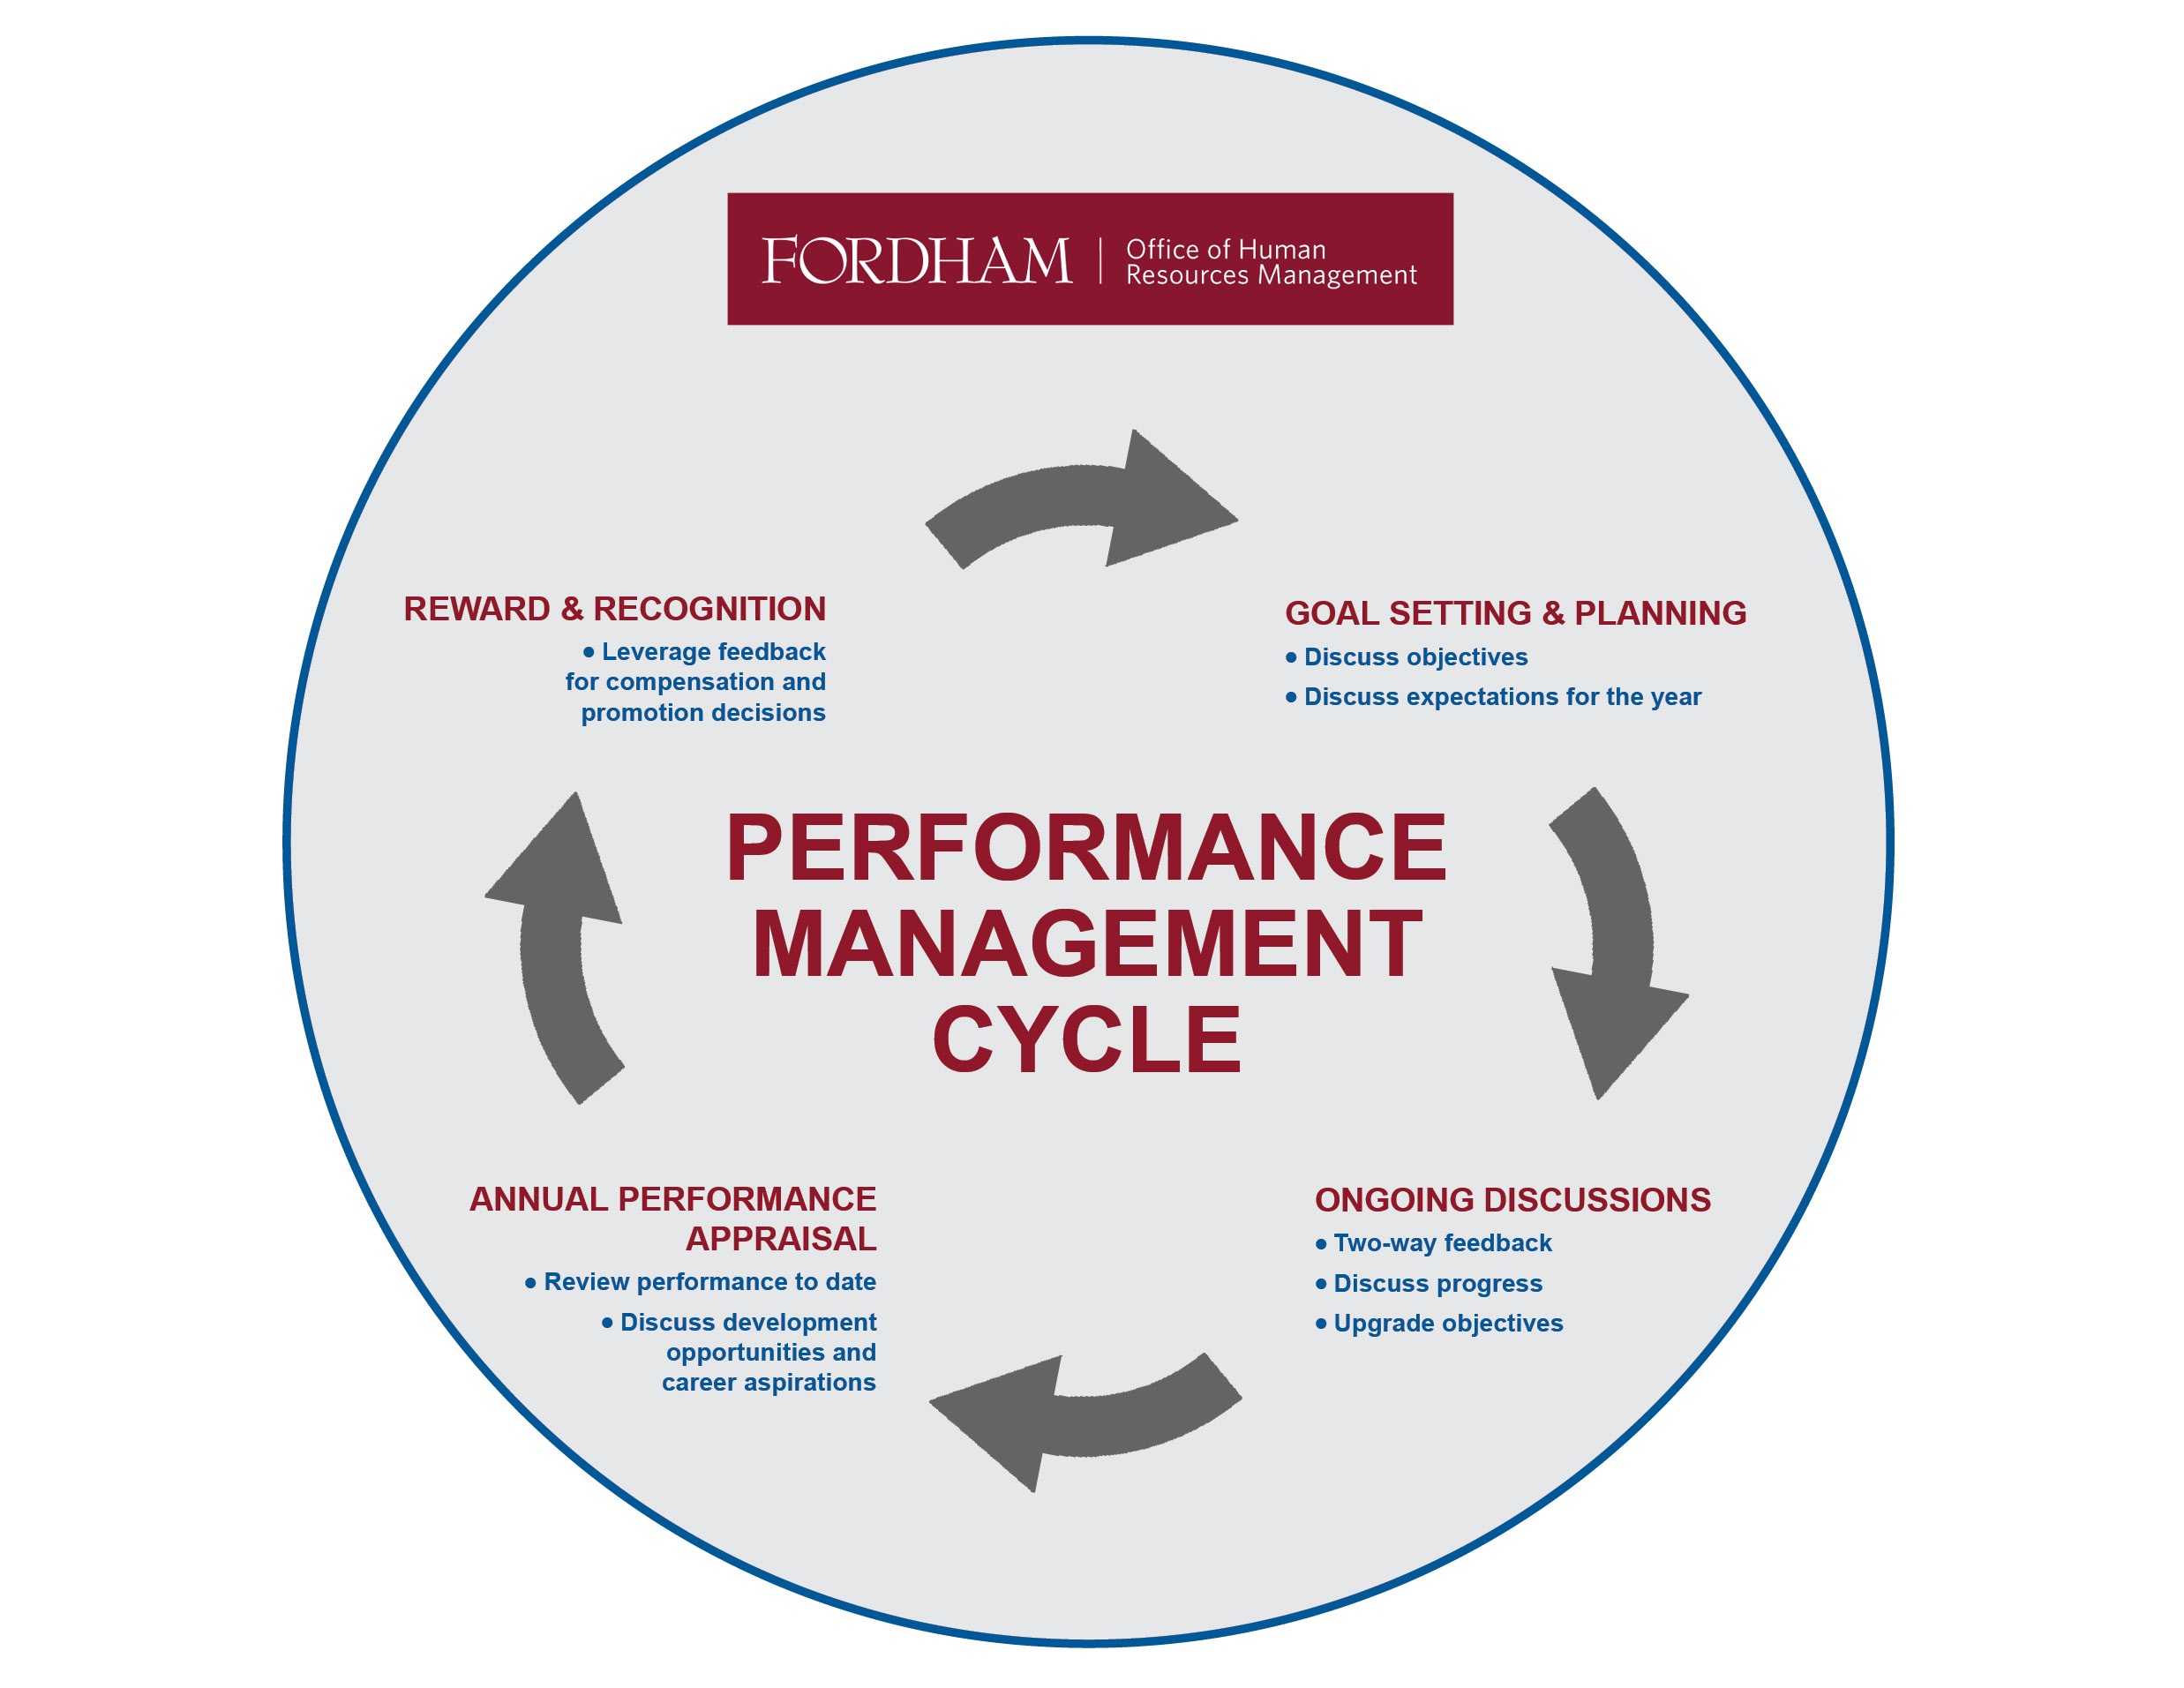 A continuous improvement process for planning, checking and measuring employee performance